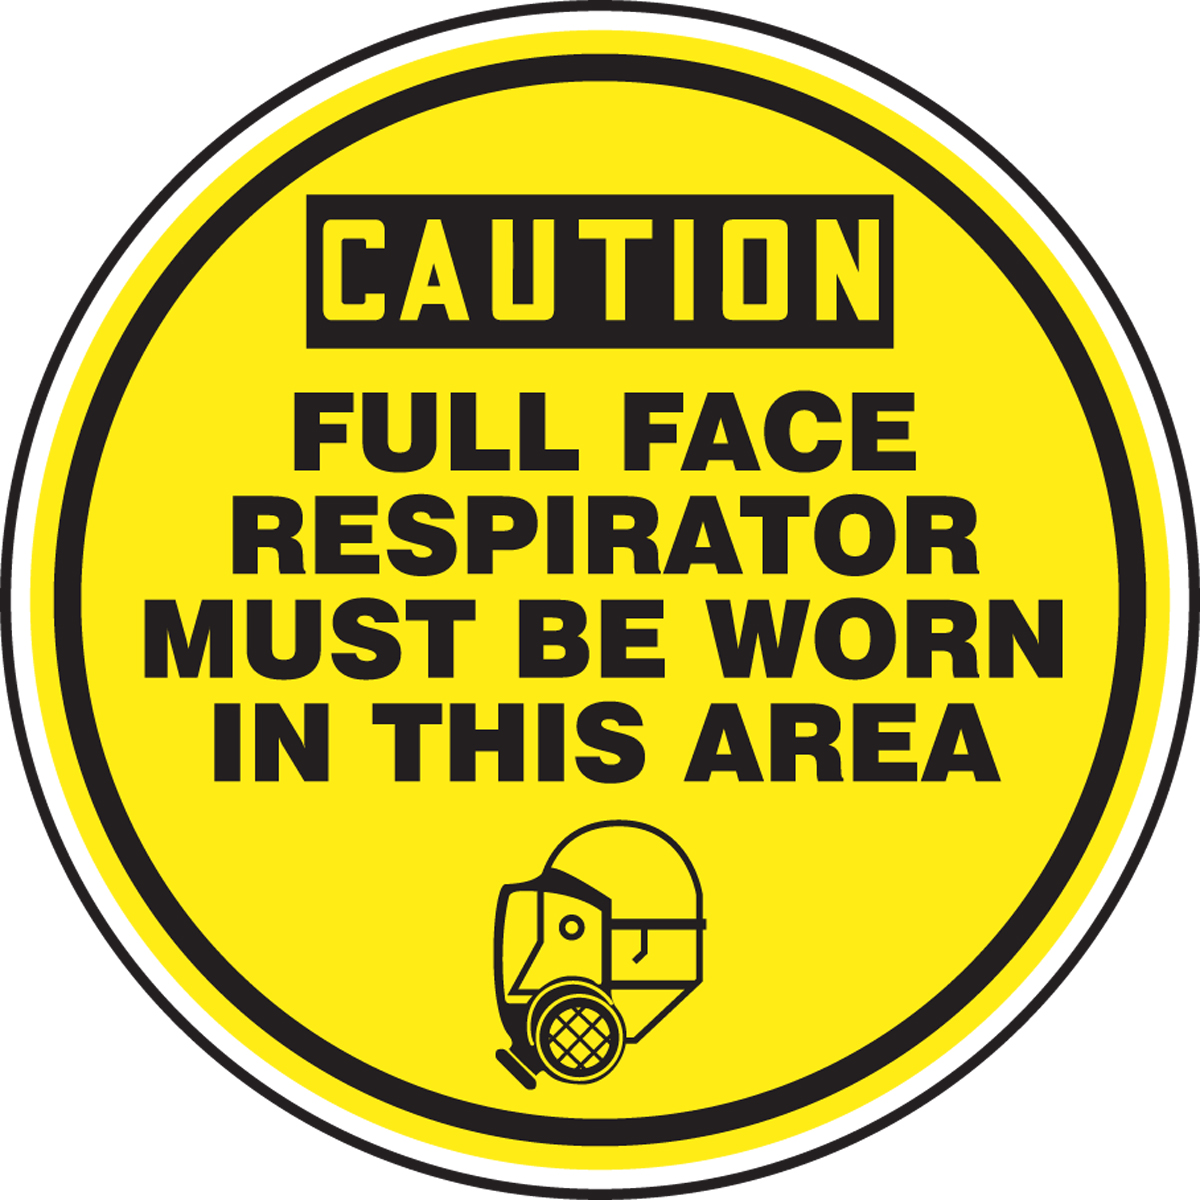 CAUTION FULL FACE RESPIRATOR MUST BE WORN IN THIS AREA (W/GRAPHIC)